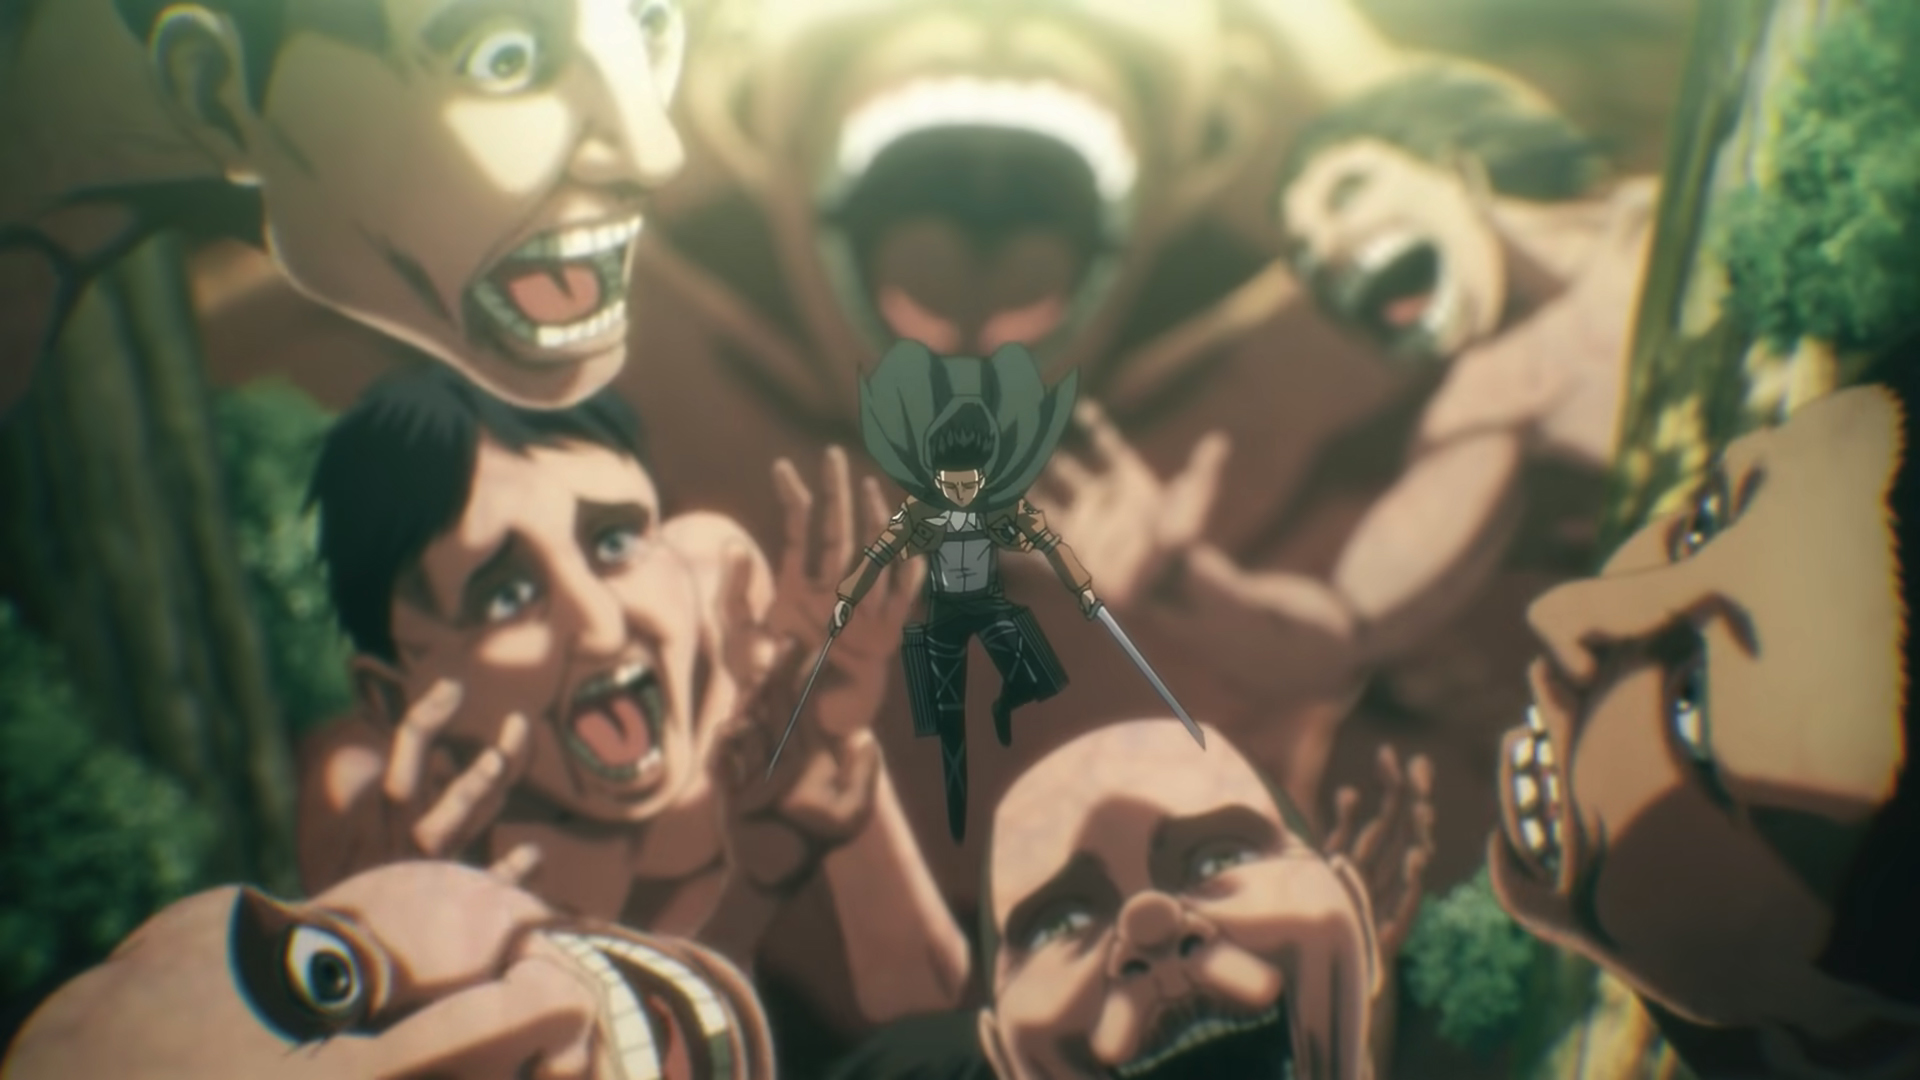 Attack On Titan Season 4 What You Need To Know About The Hit Anime Series Techradar So as we know attack on titan season 4 trialer was out a week ago. attack on titan season 4 what you need